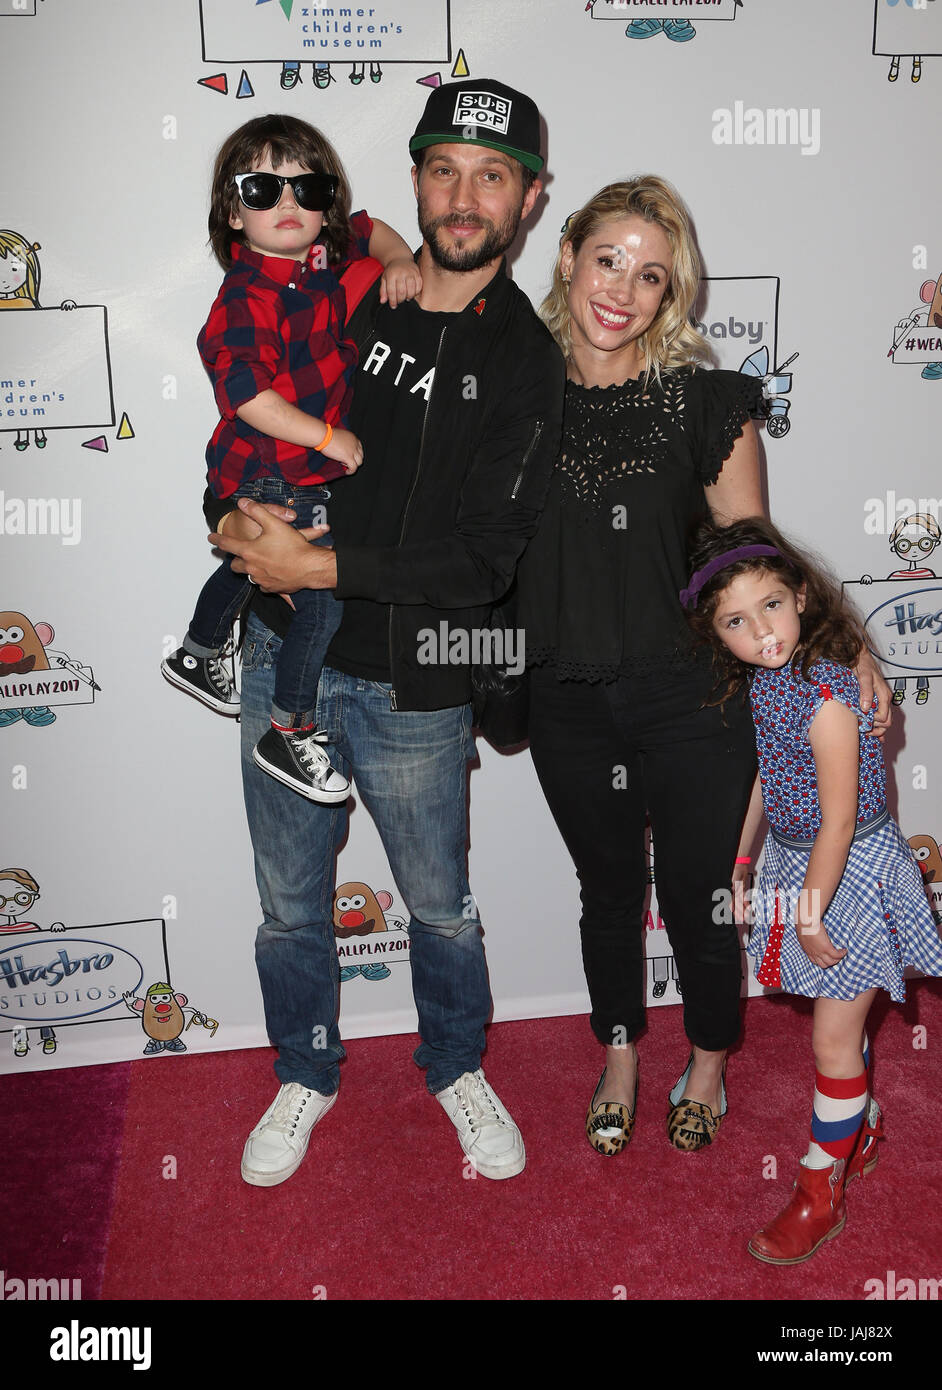 Zimmer Children's Museum 'We All Play' event  Featuring: Tennessee Logan Marshall-Green, Logan Marshall-Green, Diane Marshall-Green, and Culla Mae Marshall-Green Where: Los Angeles, California, United States When: 30 Apr 2017 Credit: FayesVision/WENN.com Stock Photo